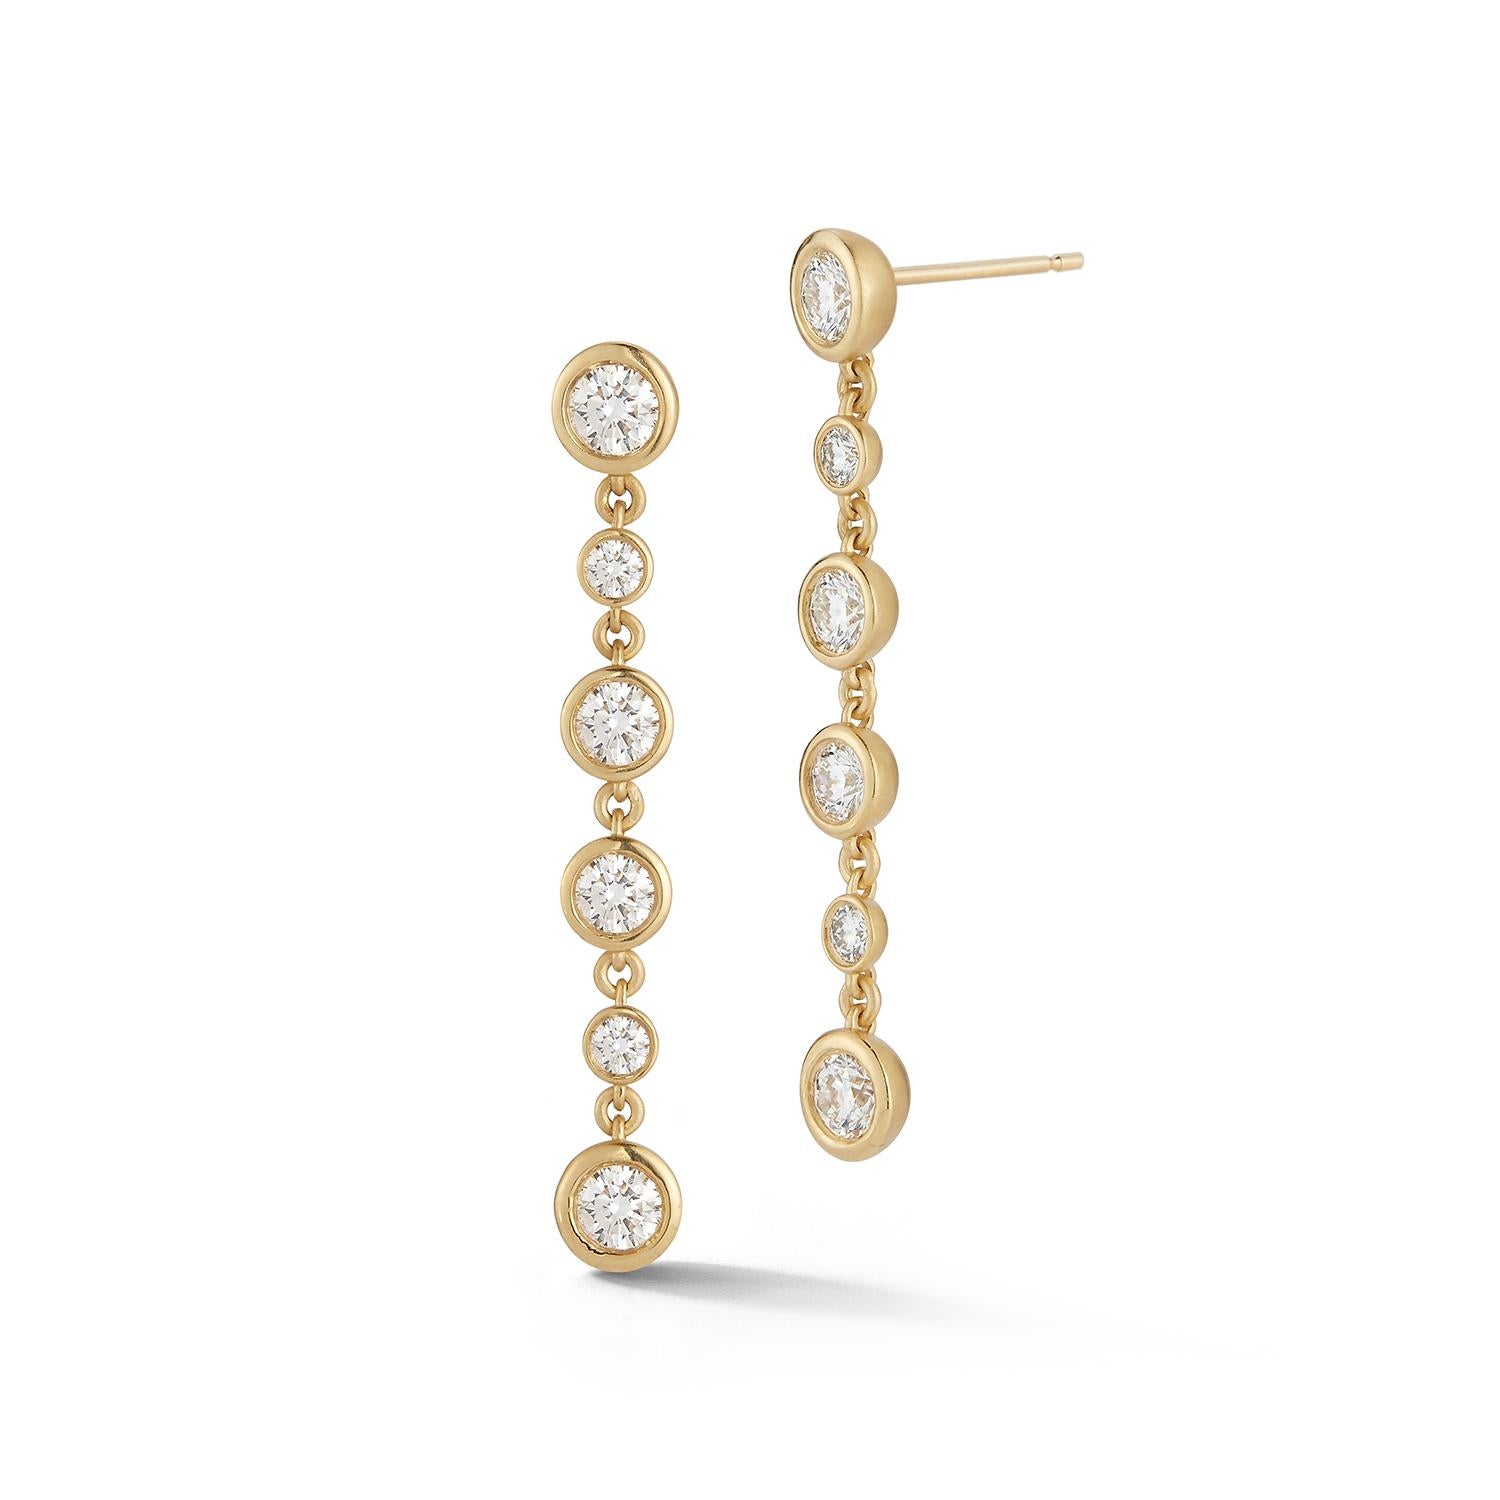 Carelle Whirl transforms the City’s energy and rhythm into chic essentials designed to navigate everyday twists and turns with an elevated sense of style and sophistication.

These 18-karat yellow gold Cascading Diamond Earrings are effortlessly